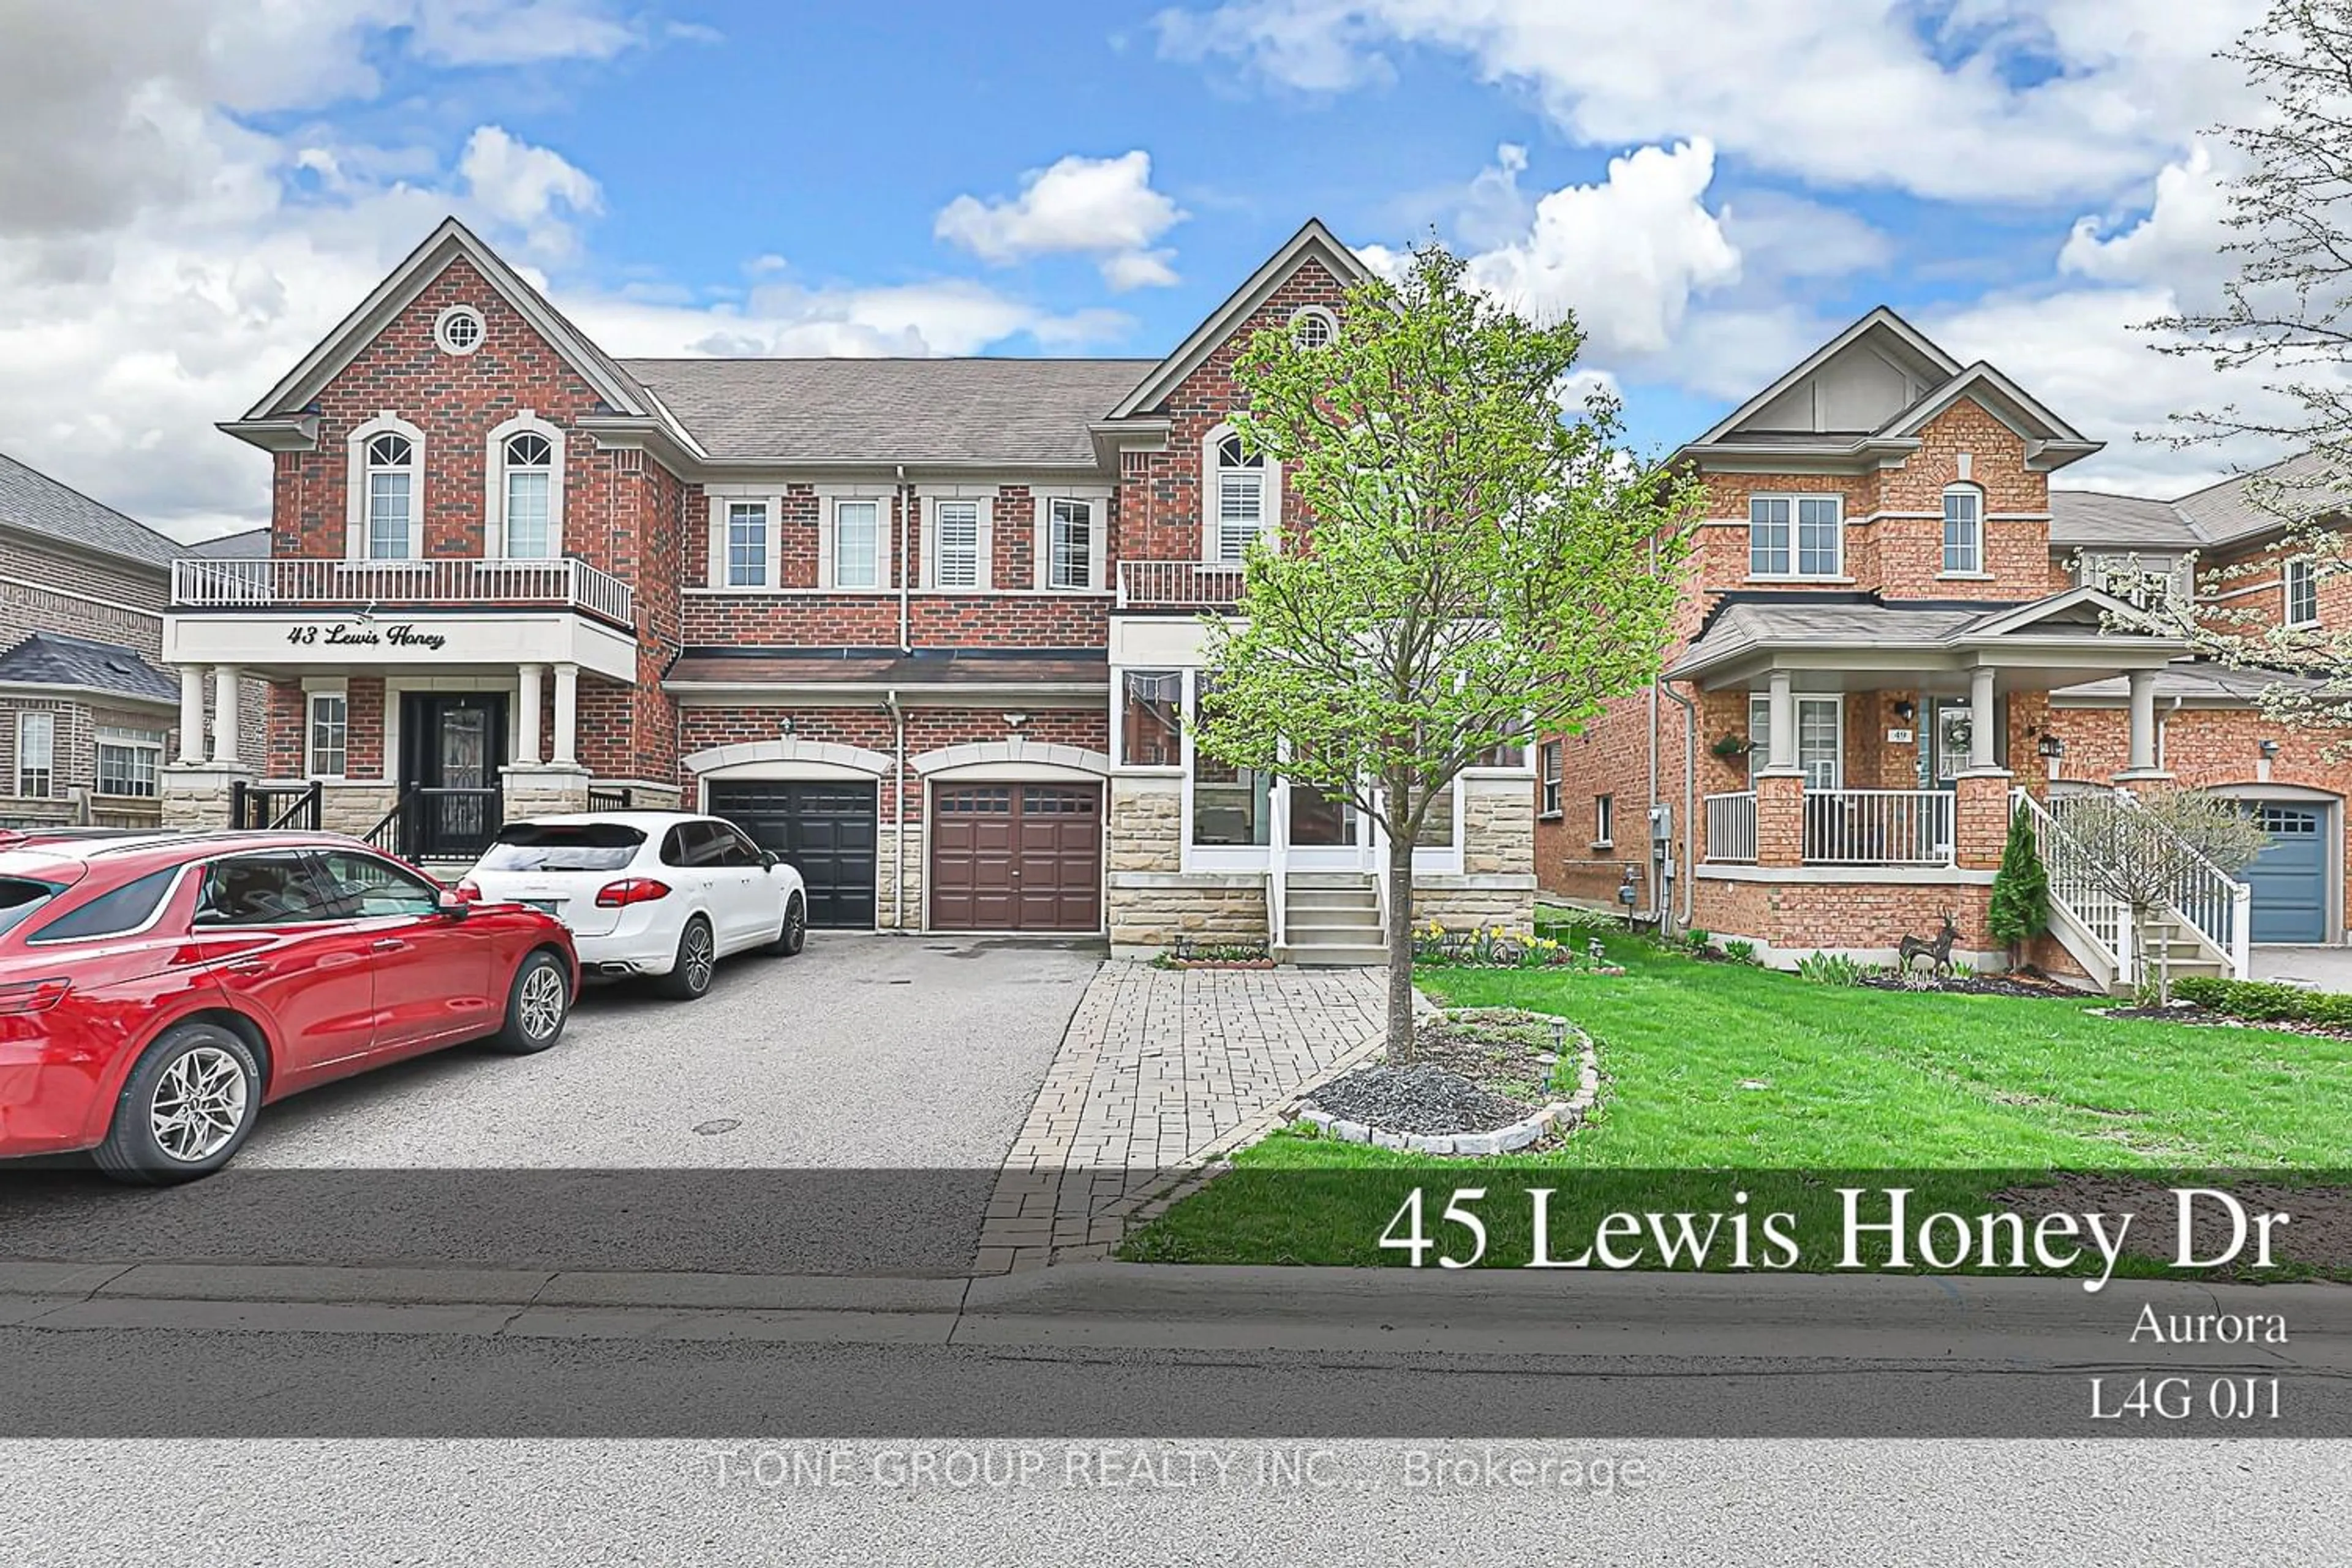 Home with brick exterior material for 45 Lewis Honey Dr, Aurora Ontario L4G 0J4